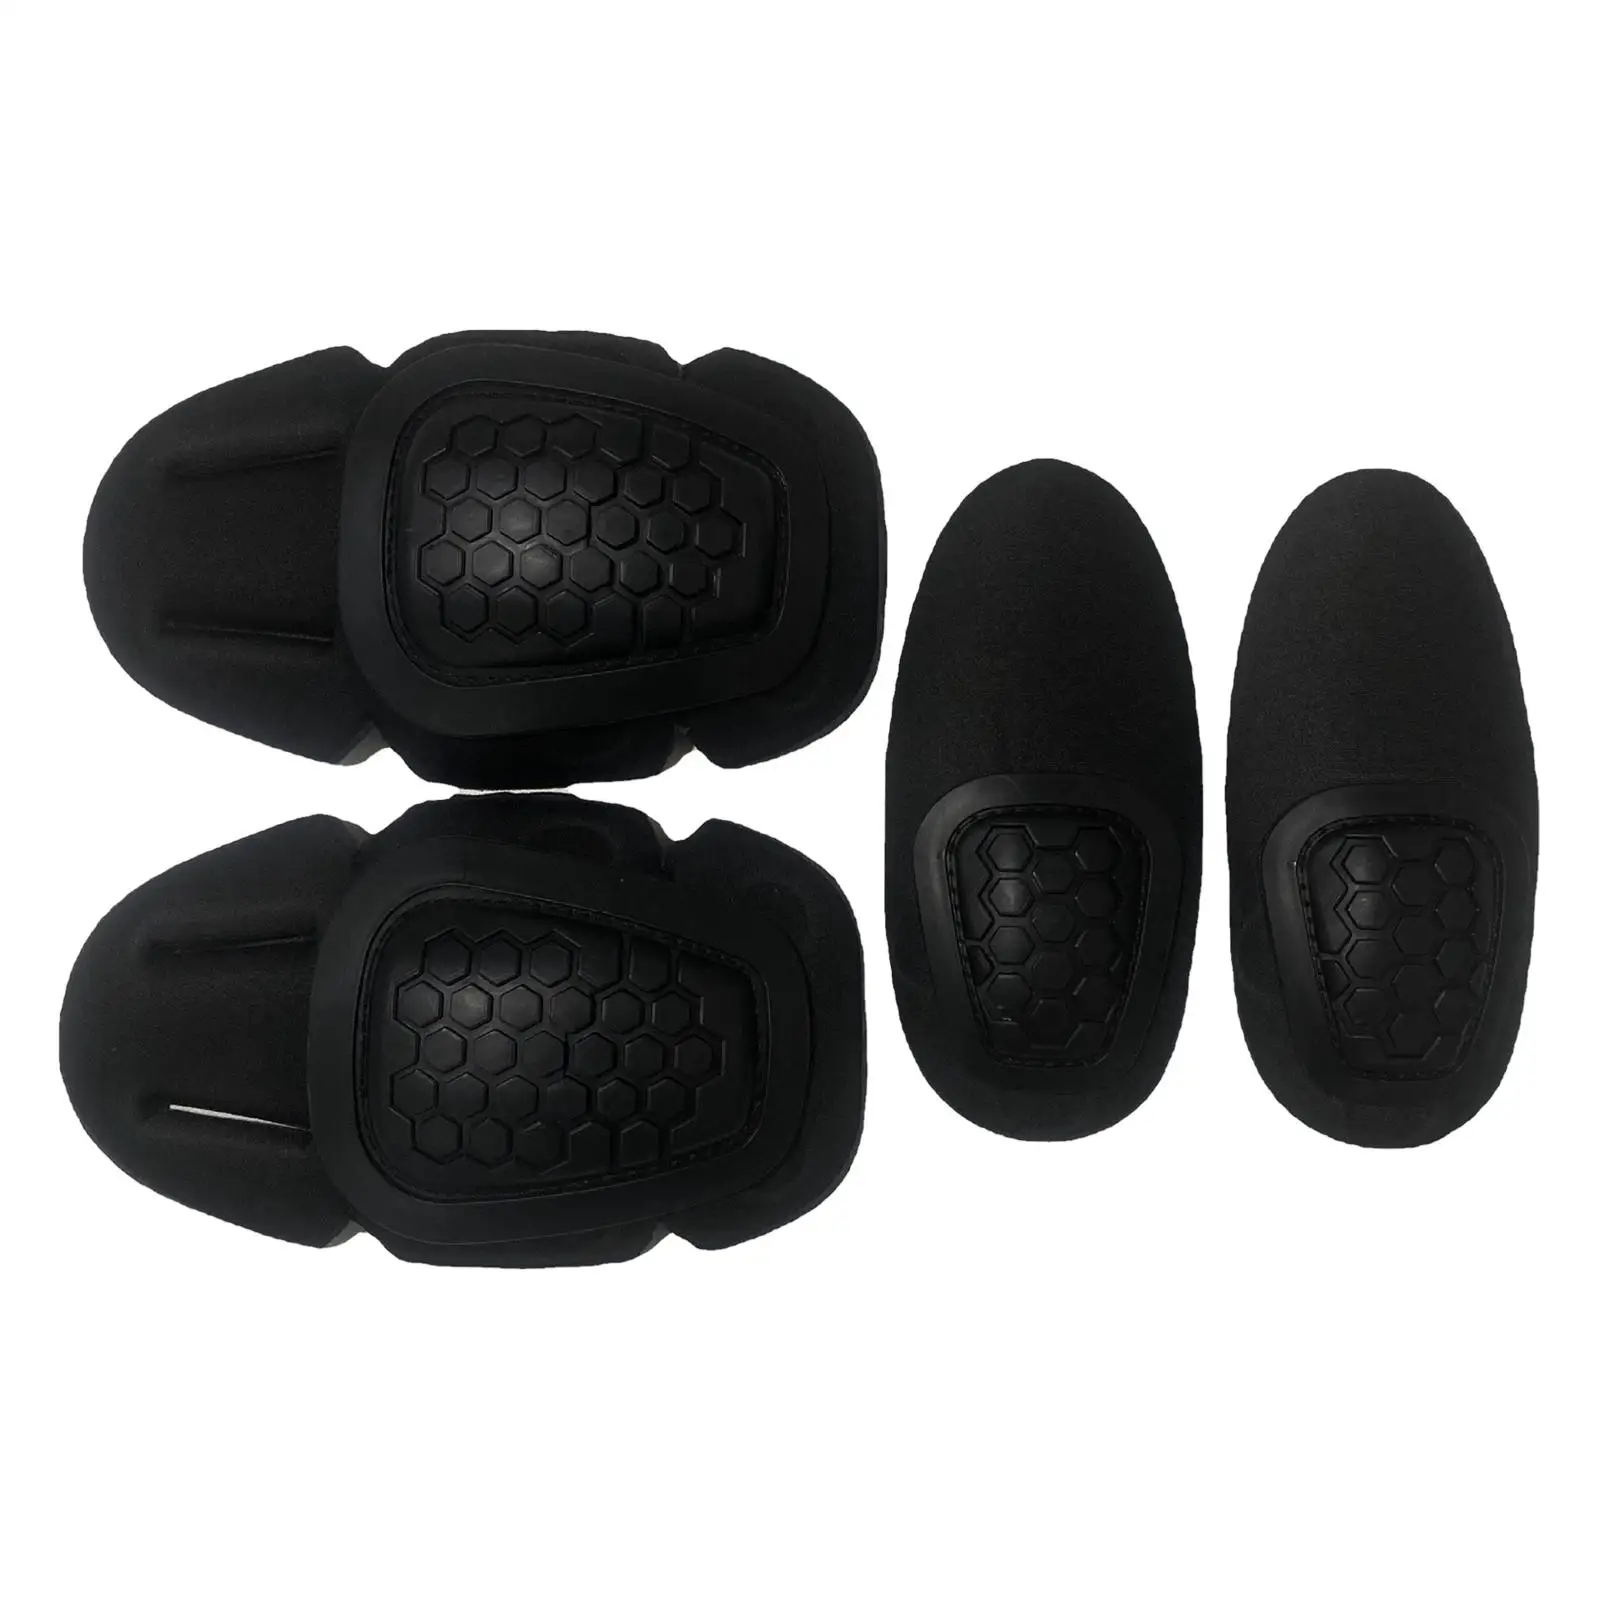 

4 Pieces Knee Elbow Support Pads Non Slip Comfortable Flexible Shin Guards Protective for Bike Scooter Rollerblading Skating